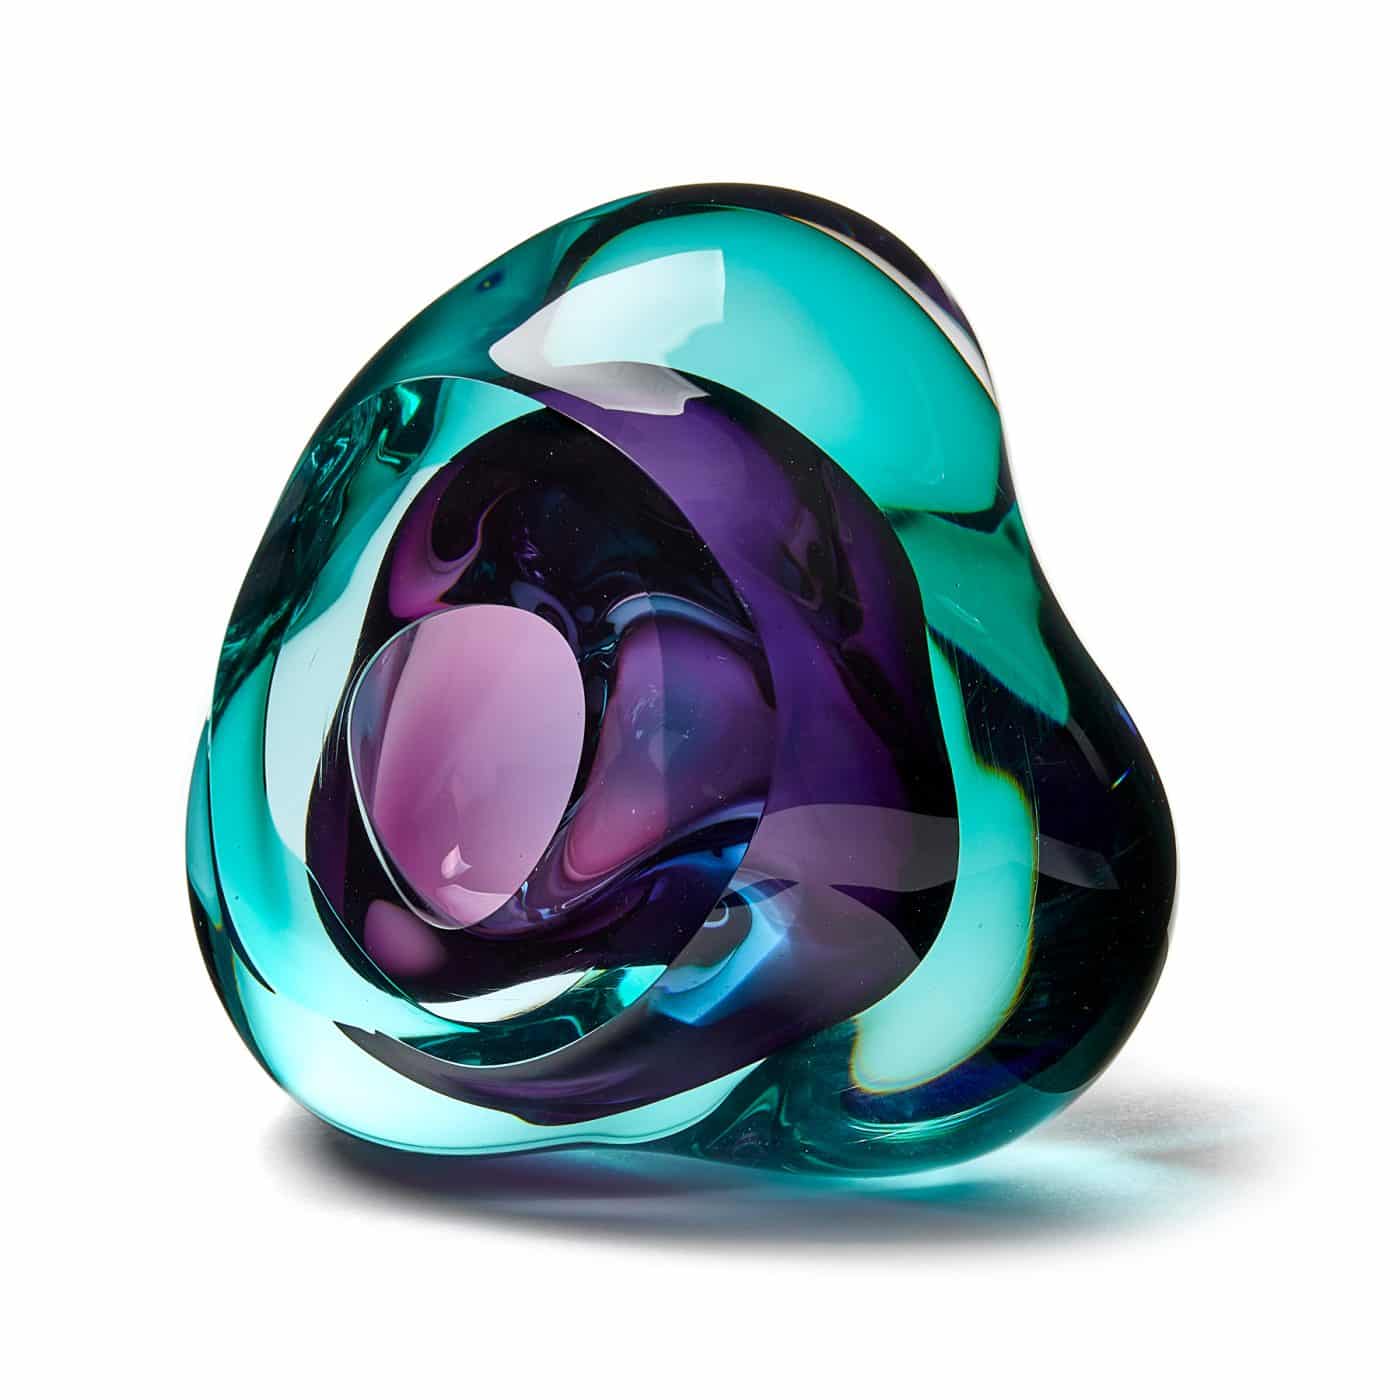 A green and purple glass sculpture by SAMANTHA DONALDSON